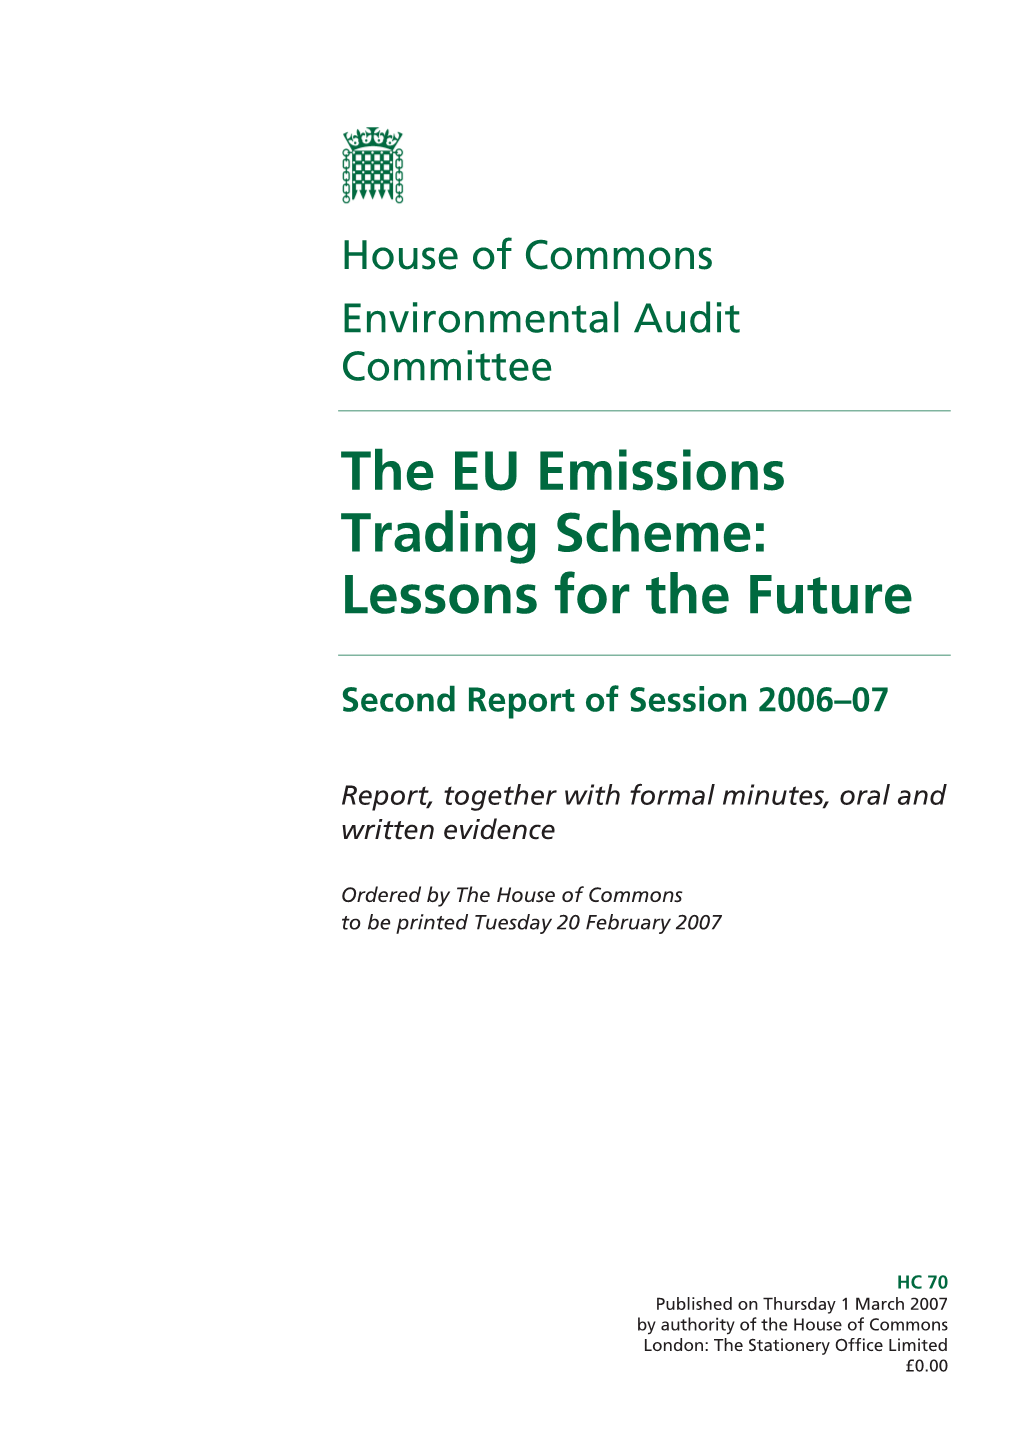 The EU Emissions Trading Scheme: Lessons for the Future